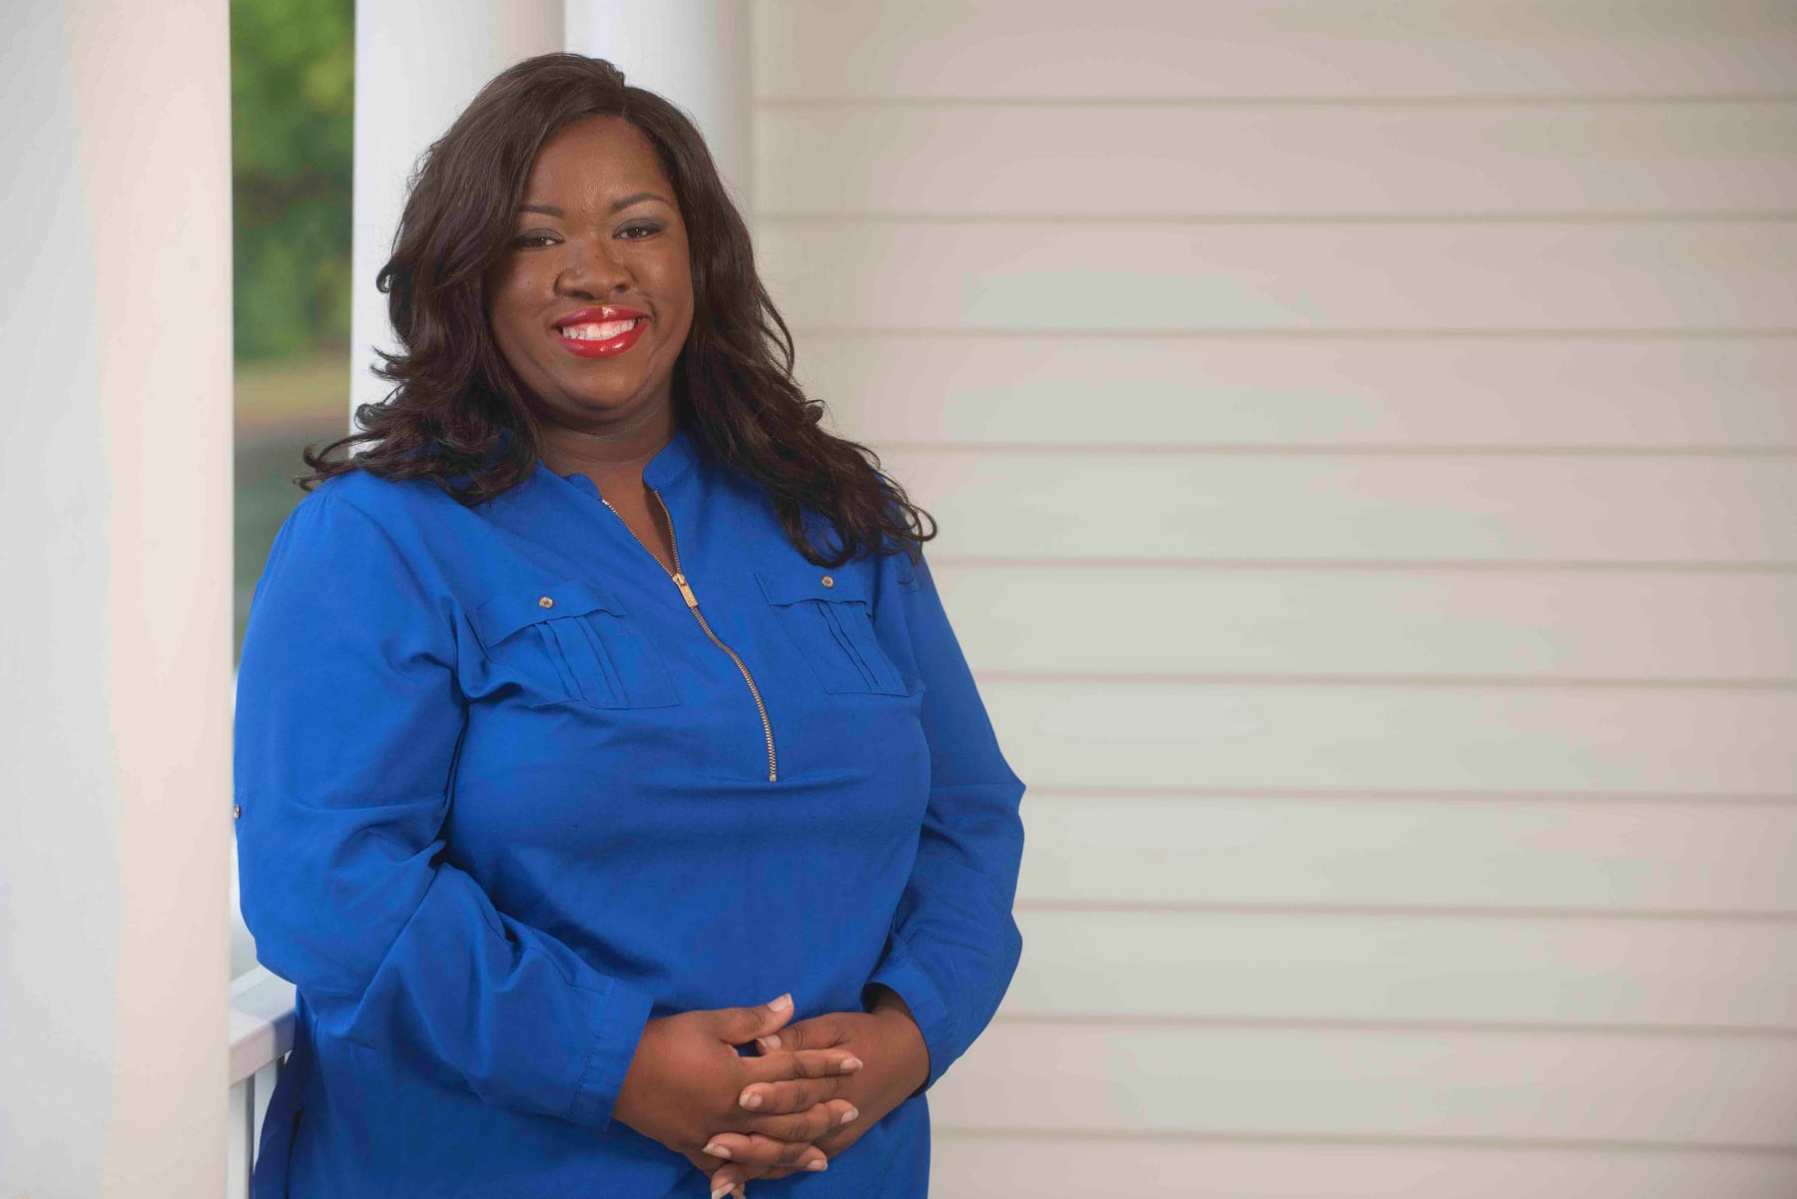 Candi King, photographed here in a blue outfit, won a special election the Virginia House of Delegates, bringing the total number of women in the state's General Assembly to 42, a record.